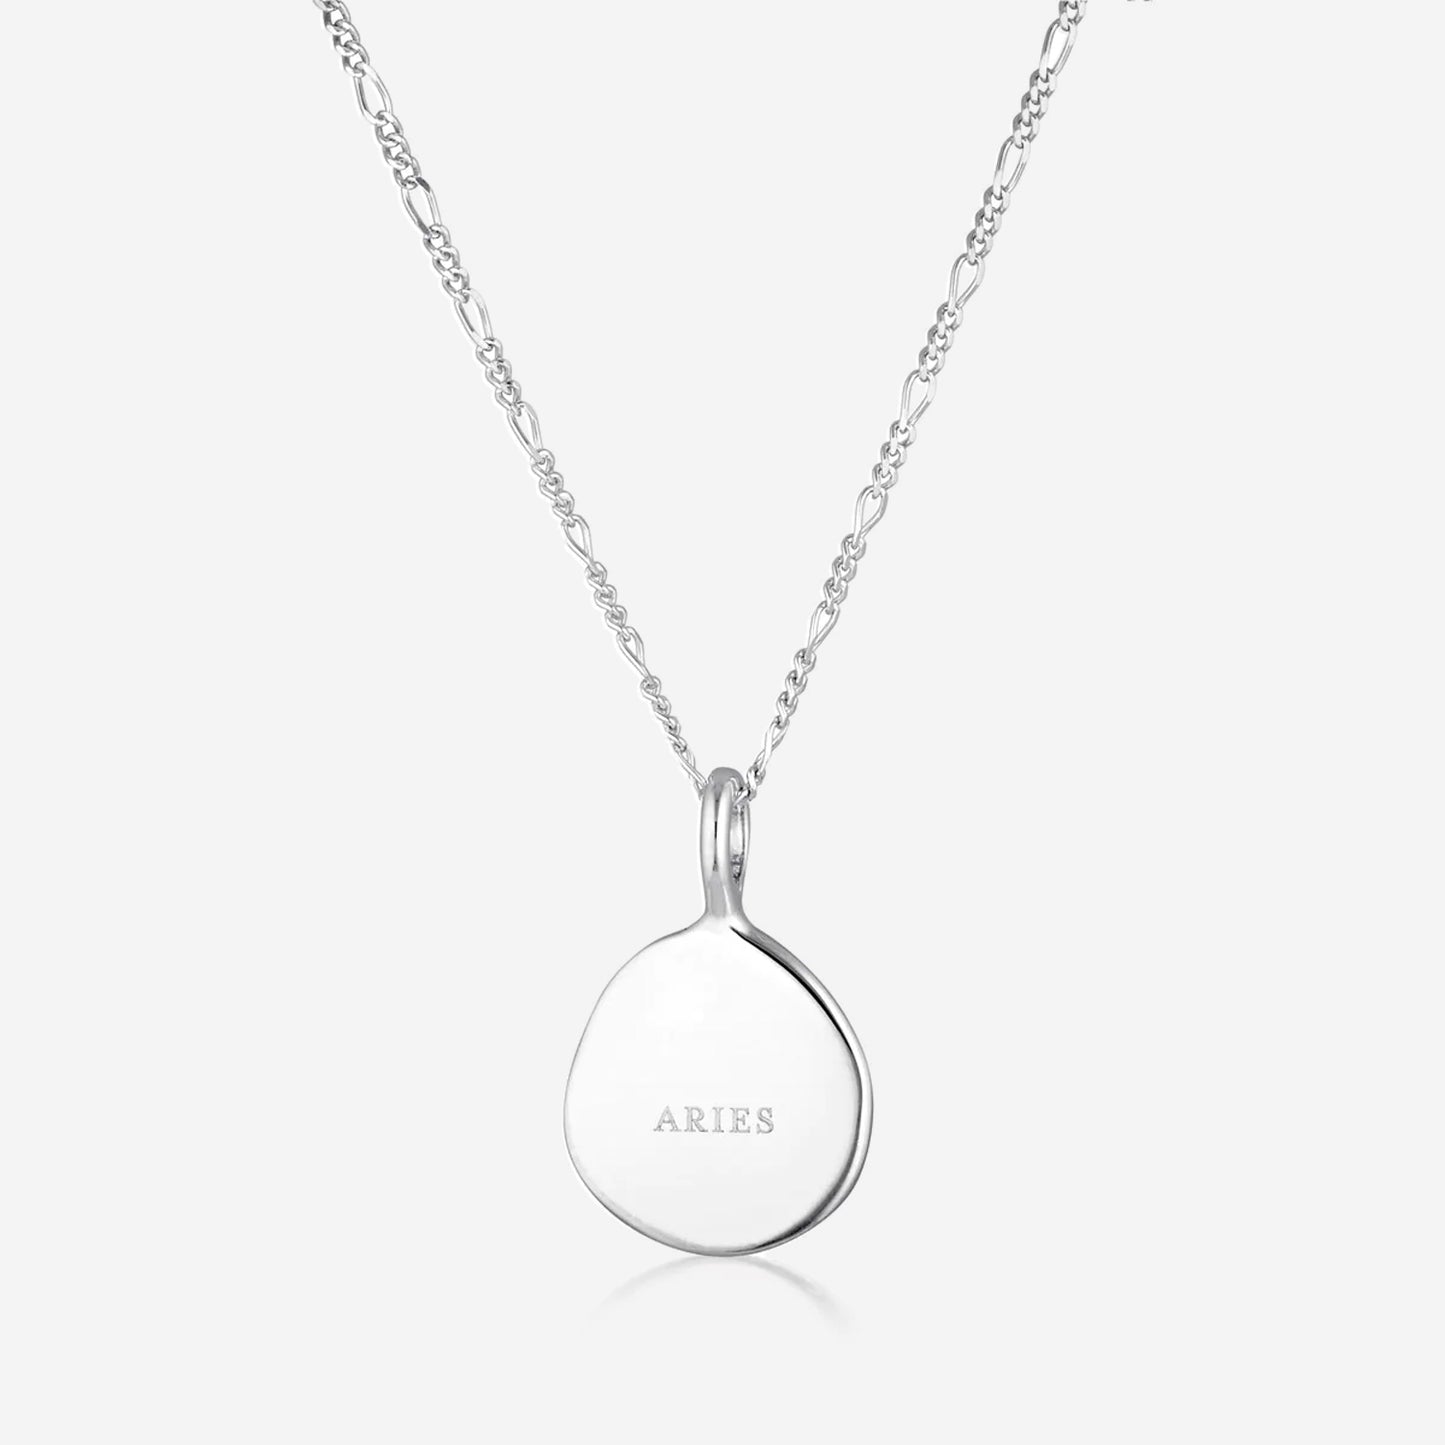 Linda Tahija - Zodiac Cable Necklace - Aries - Sterling Silver